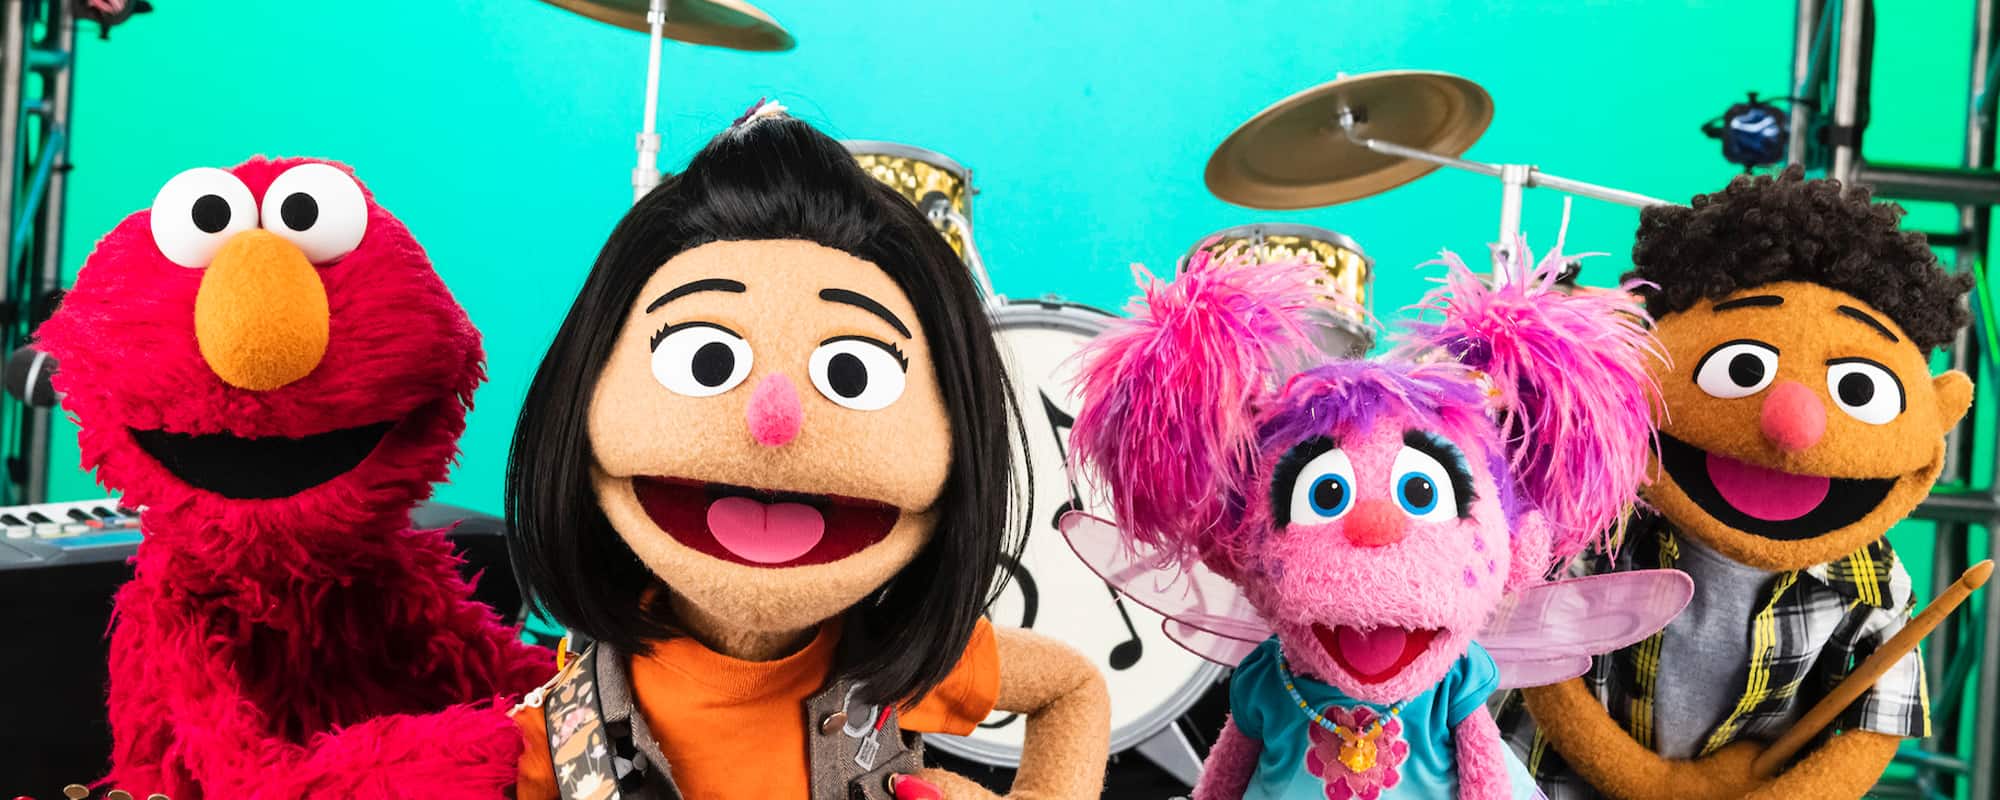 Sesame Street Makes History With First Asian American Muppet